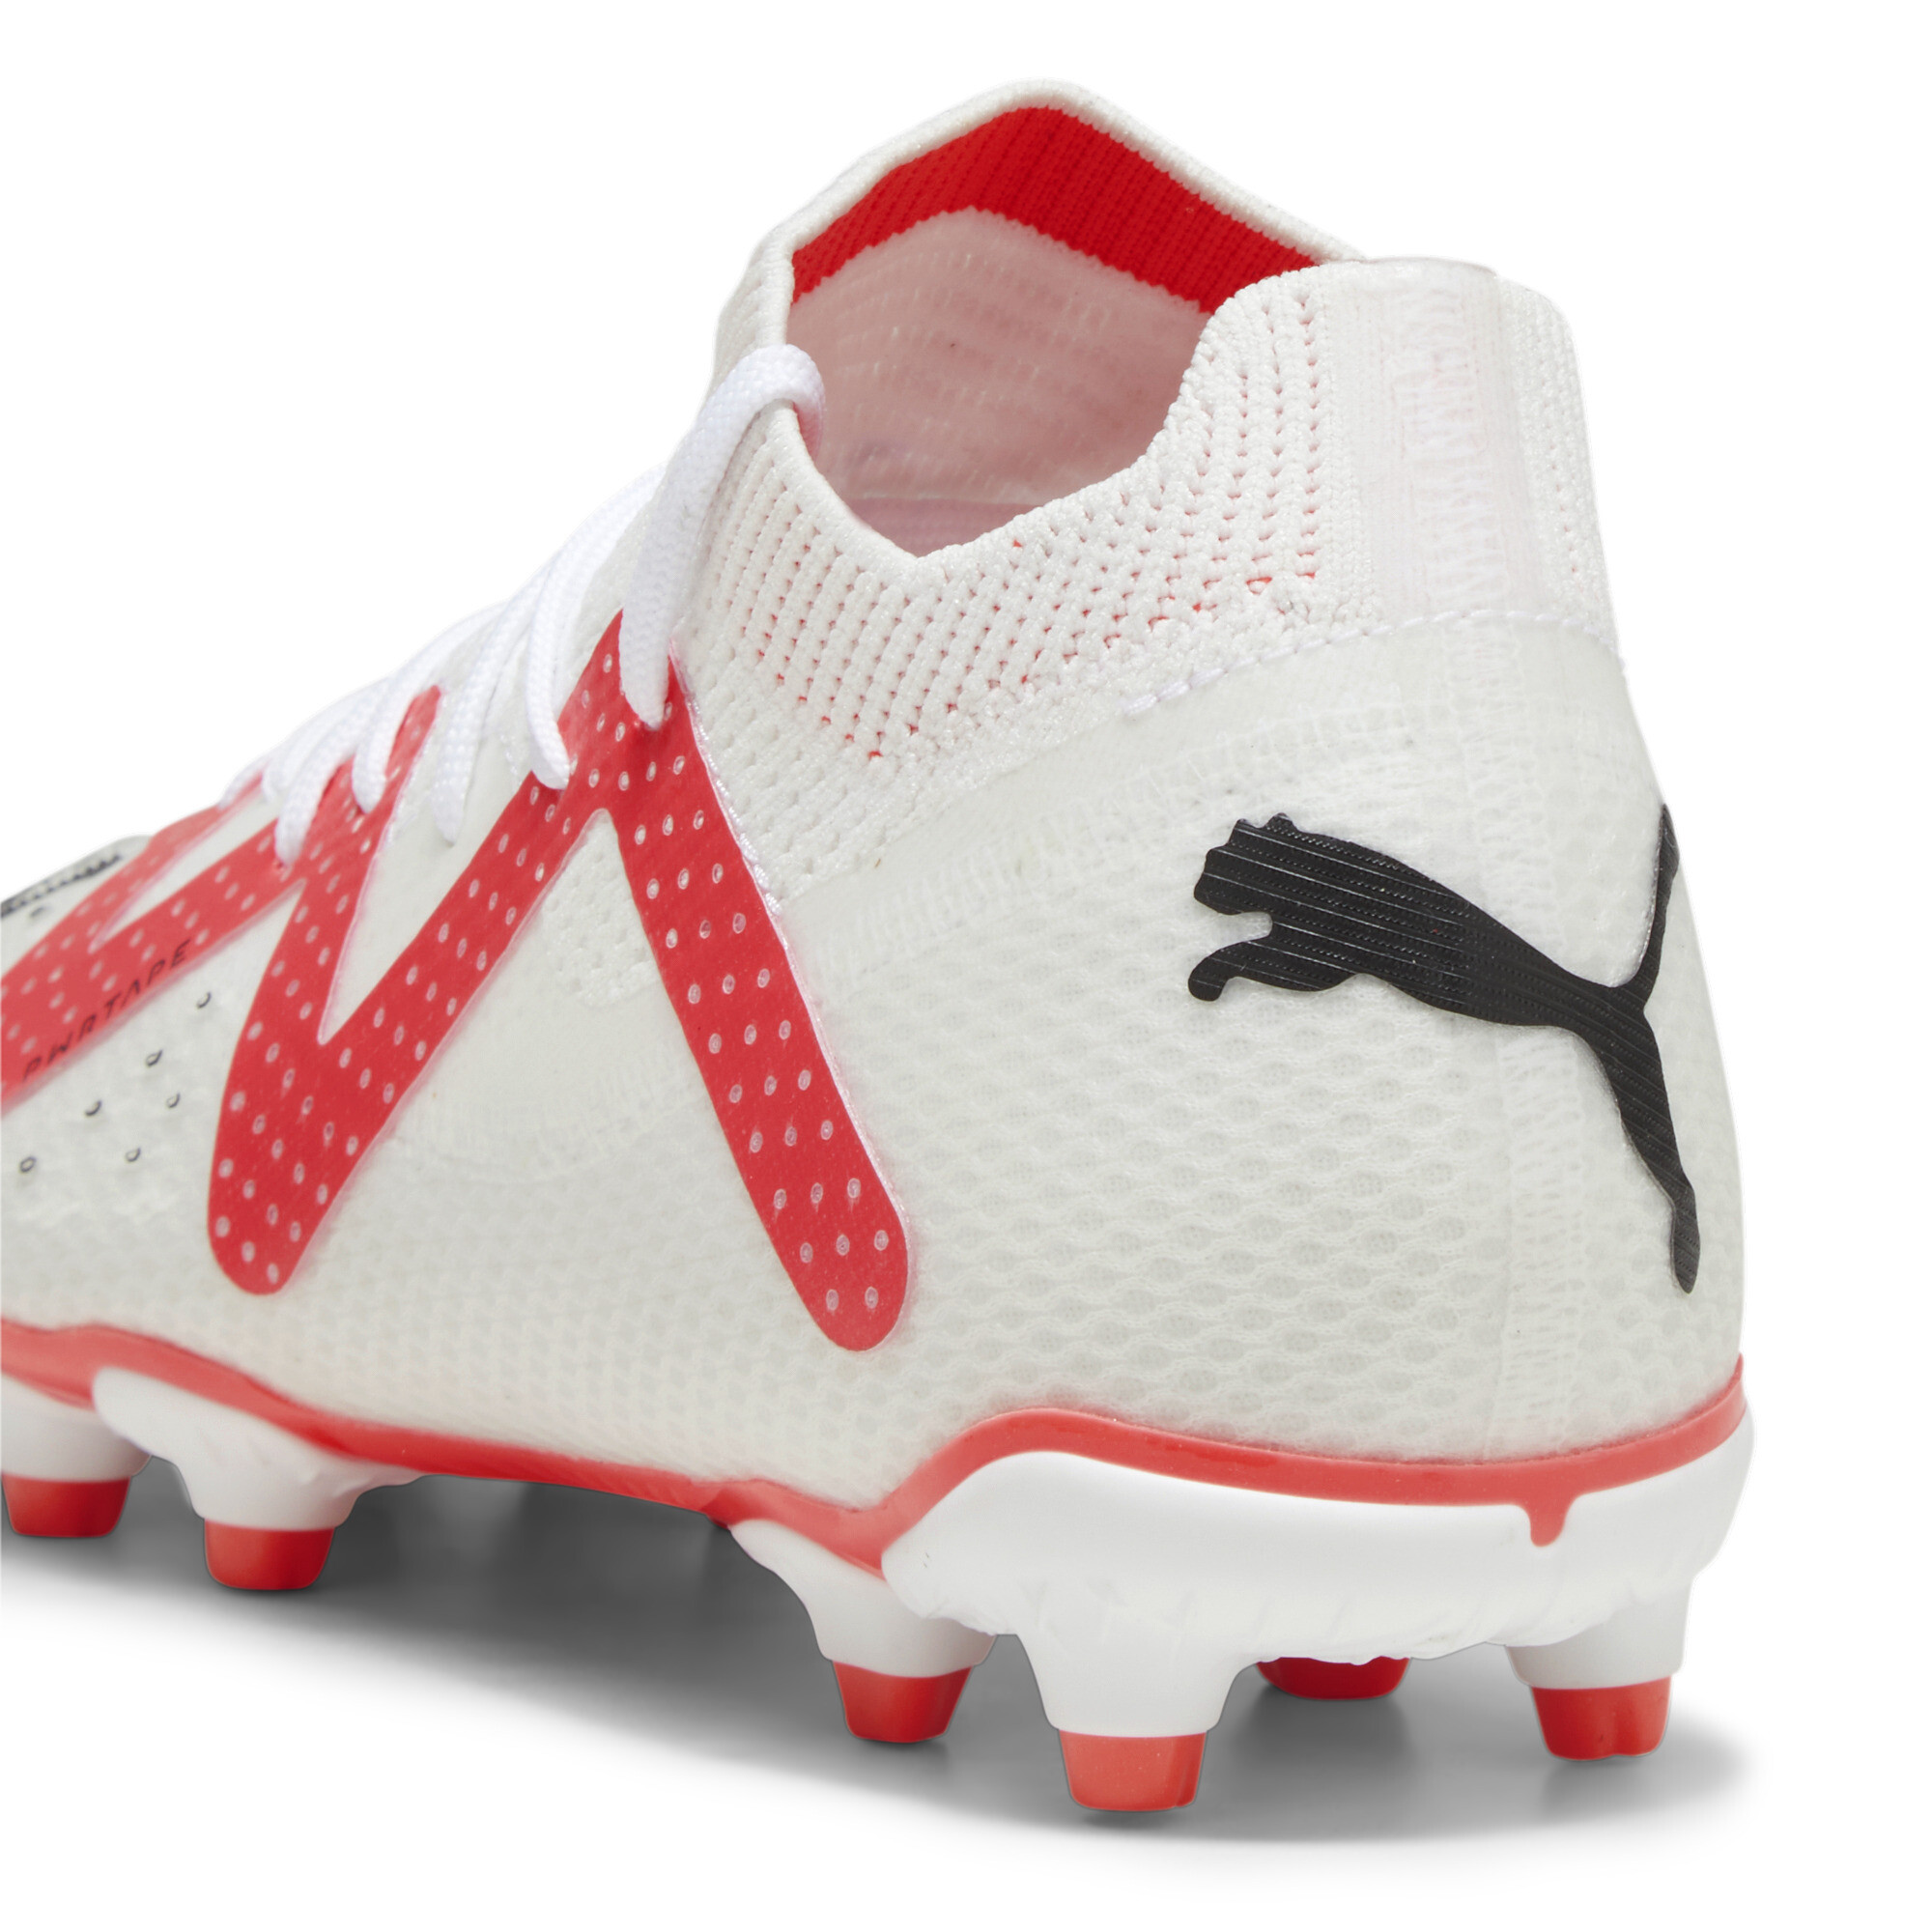 Puma FUTURE PRO FG/AG Youth Football Boots, White, Size 32, Shoes